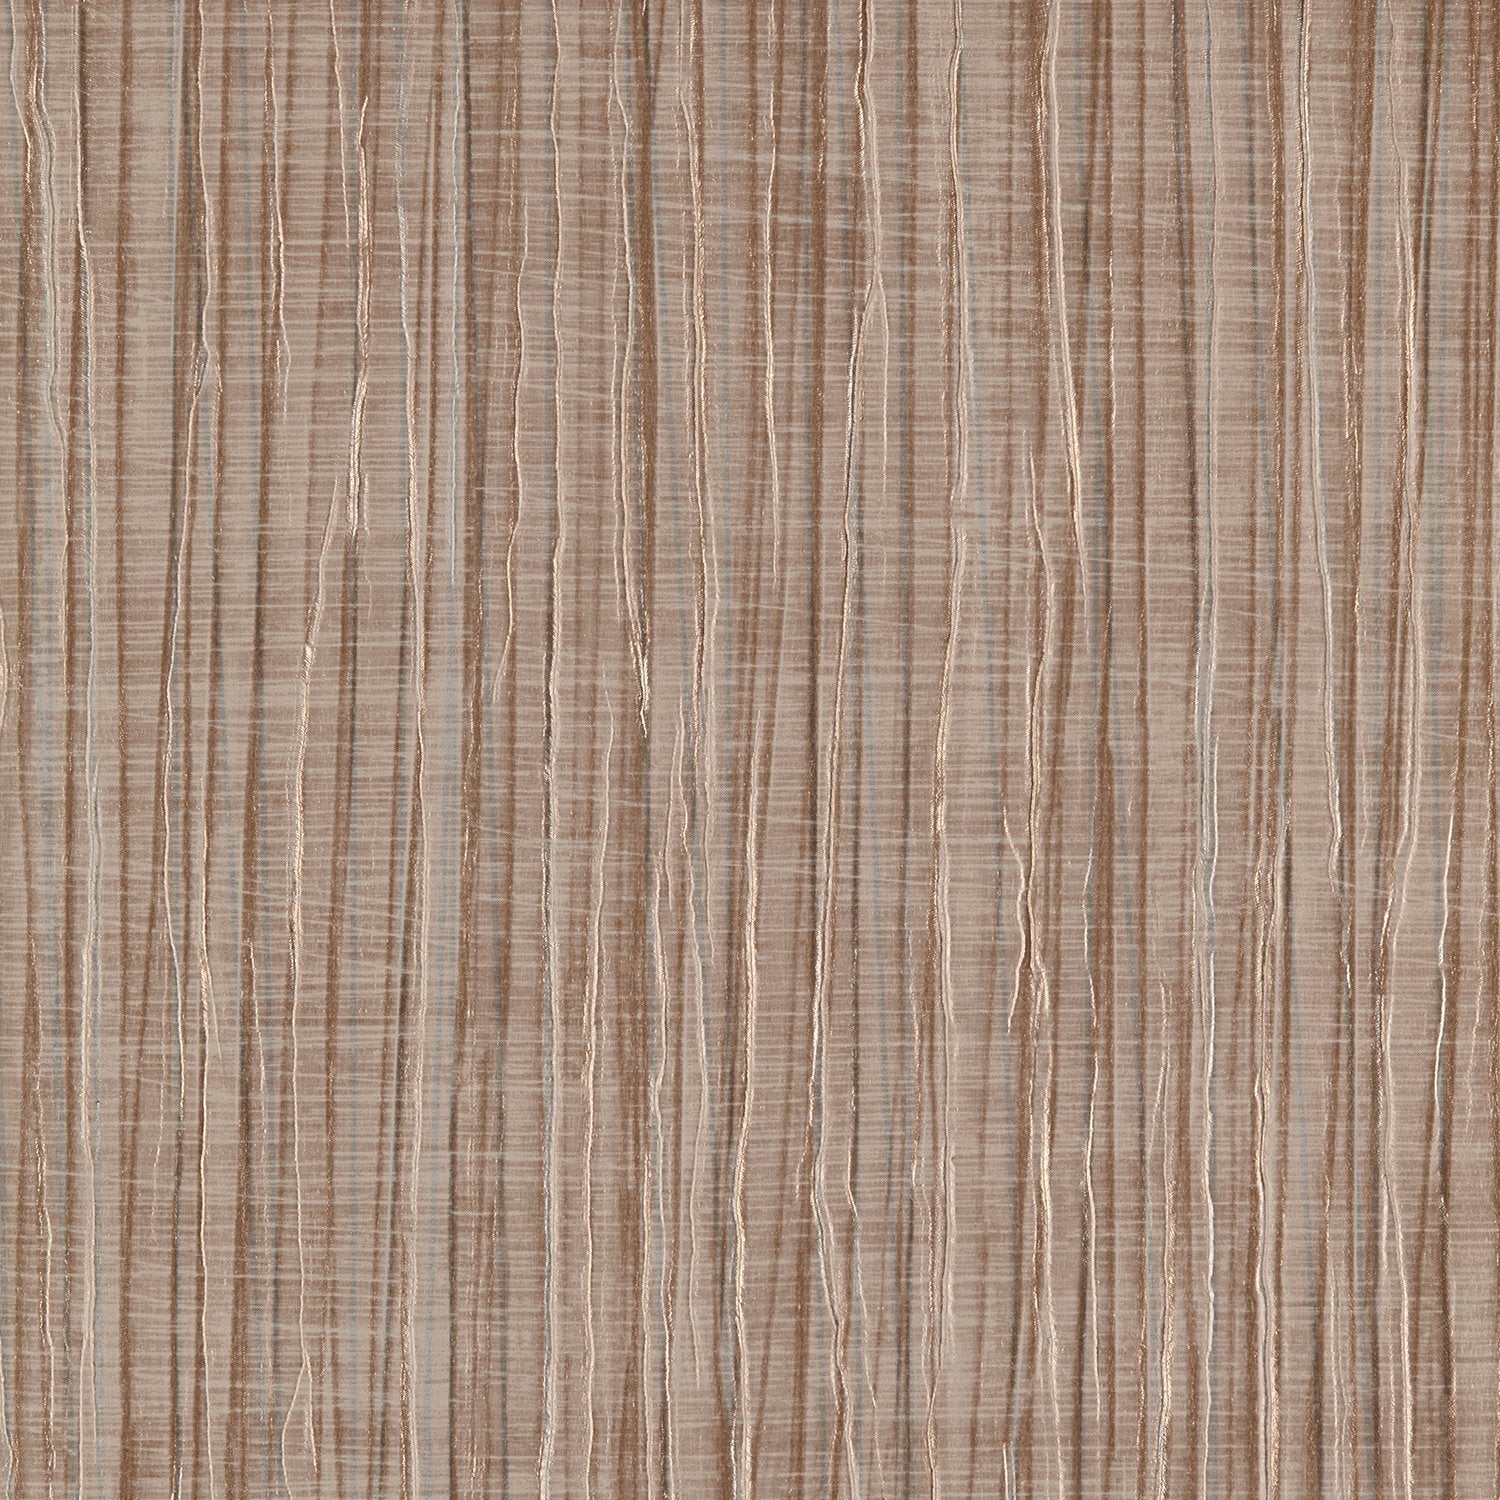 Vogue Pleat - Y47027 - Wallcovering - Vycon - Kube Contract